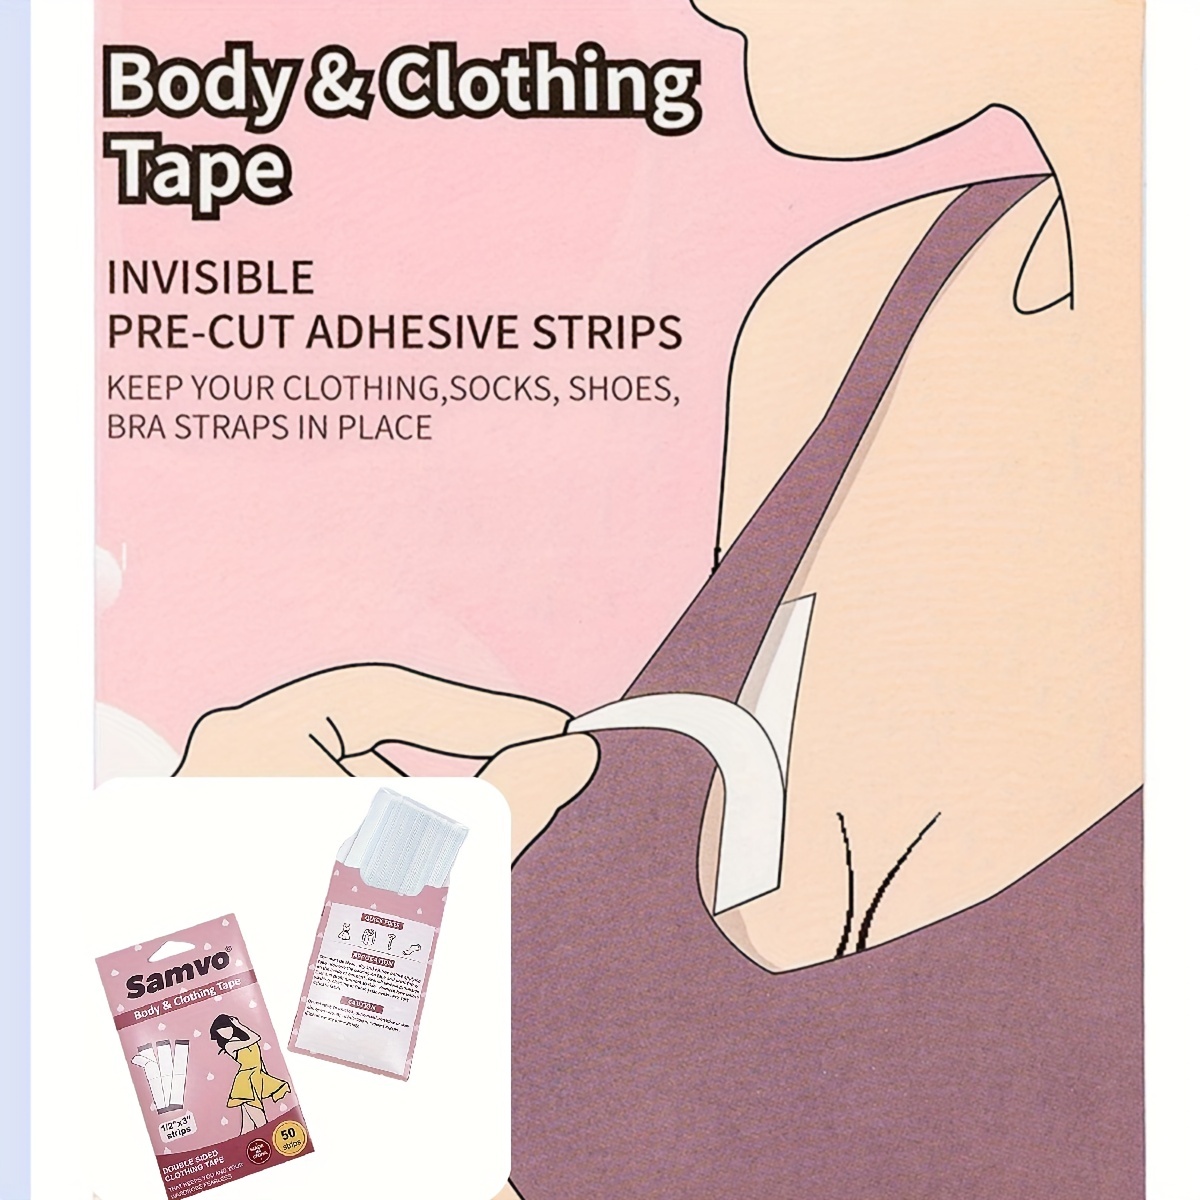 Booby Tape Double-Sided Transparent Tape for Body & Clothing, All